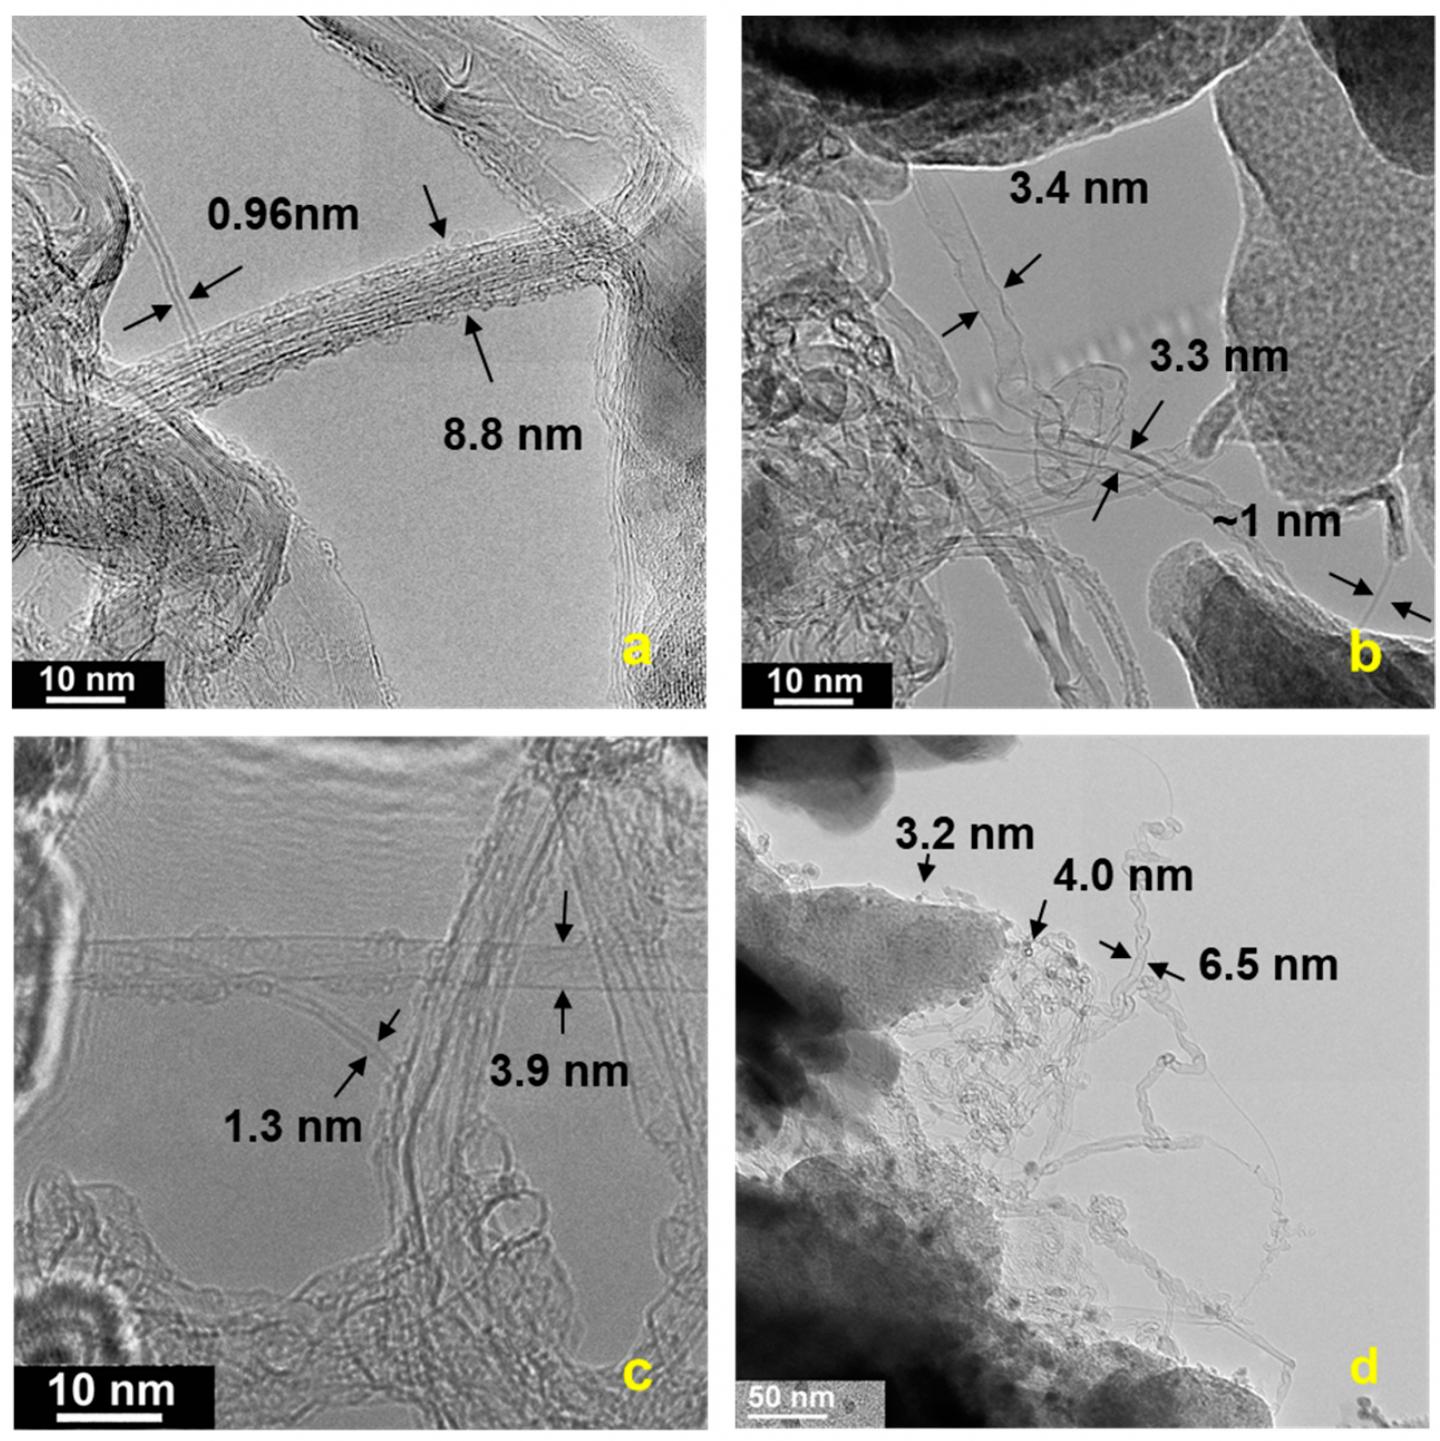 TEM images of raw carbon soot grown on kaolin sized paper showing (a) roped single-walled carbon nanotubes (SWCNTs) helically wrapped by a SWCNT, and large SWCNTs, (b) collapsed, (c) folded, and (d) twisted nanotubes. Scale bar = 10 nm (a-c) and 50 nm (d). Source: Rice University